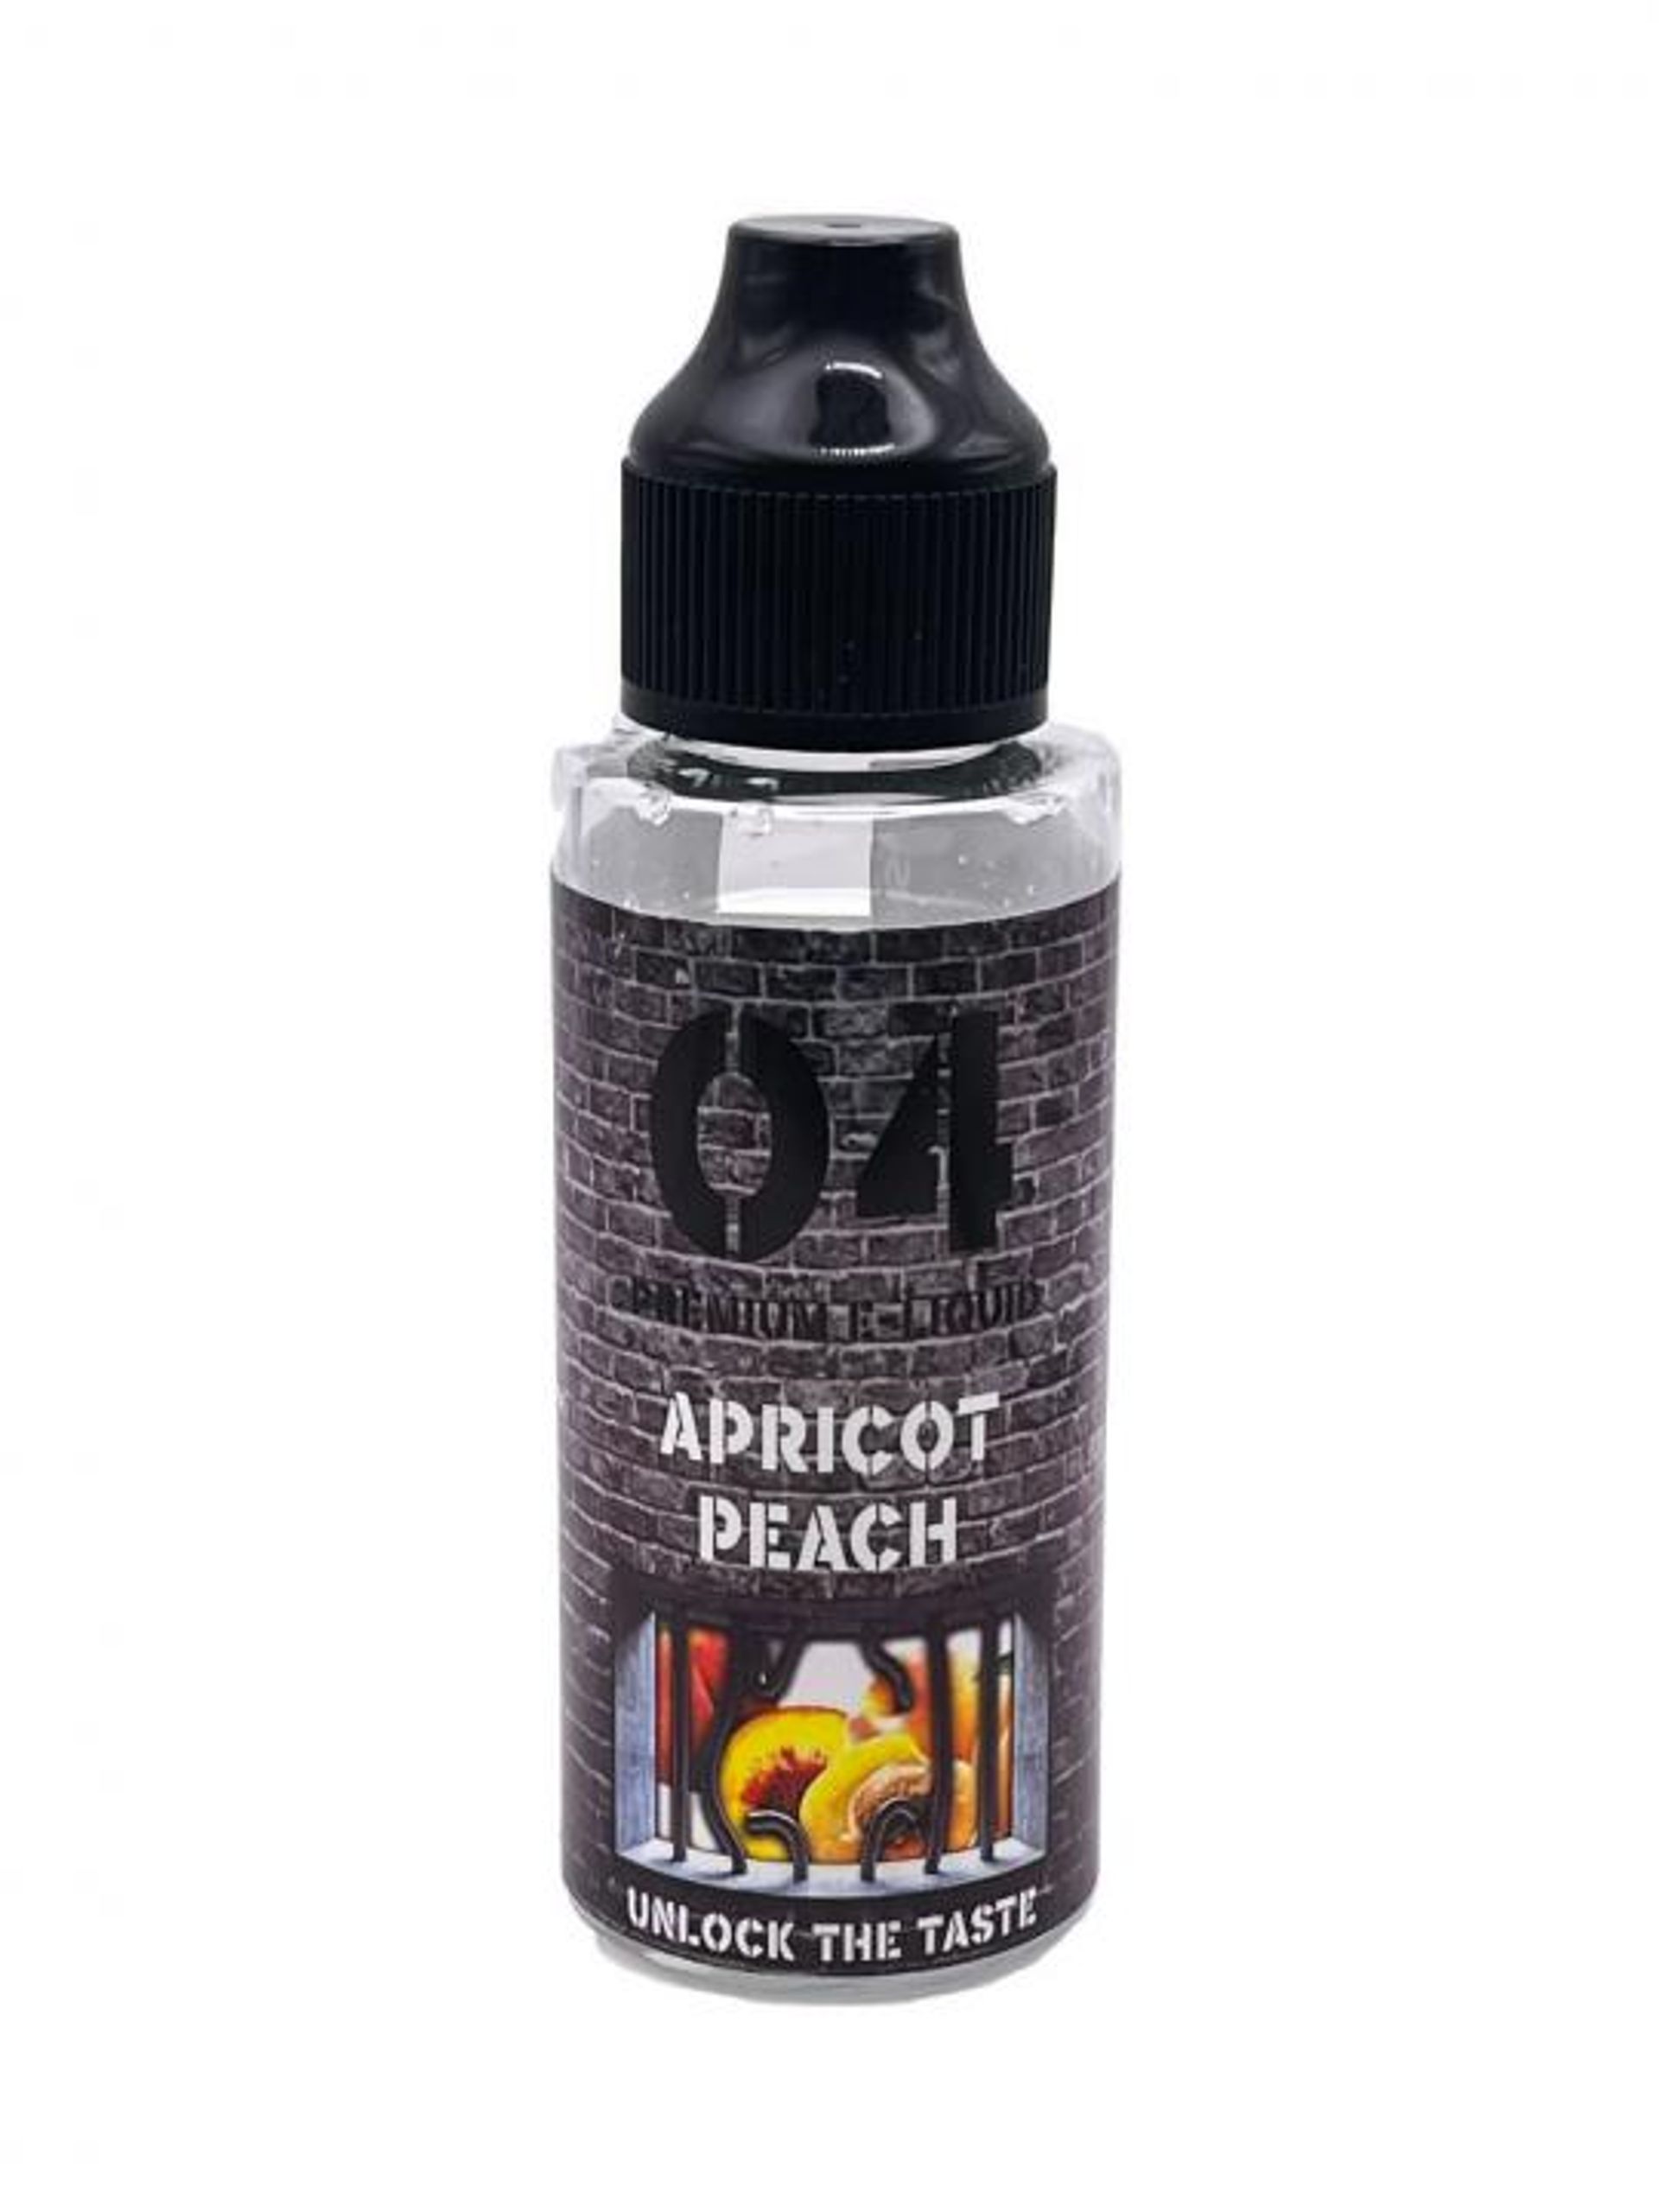 Image of Apricot Peach by 04 Liquids